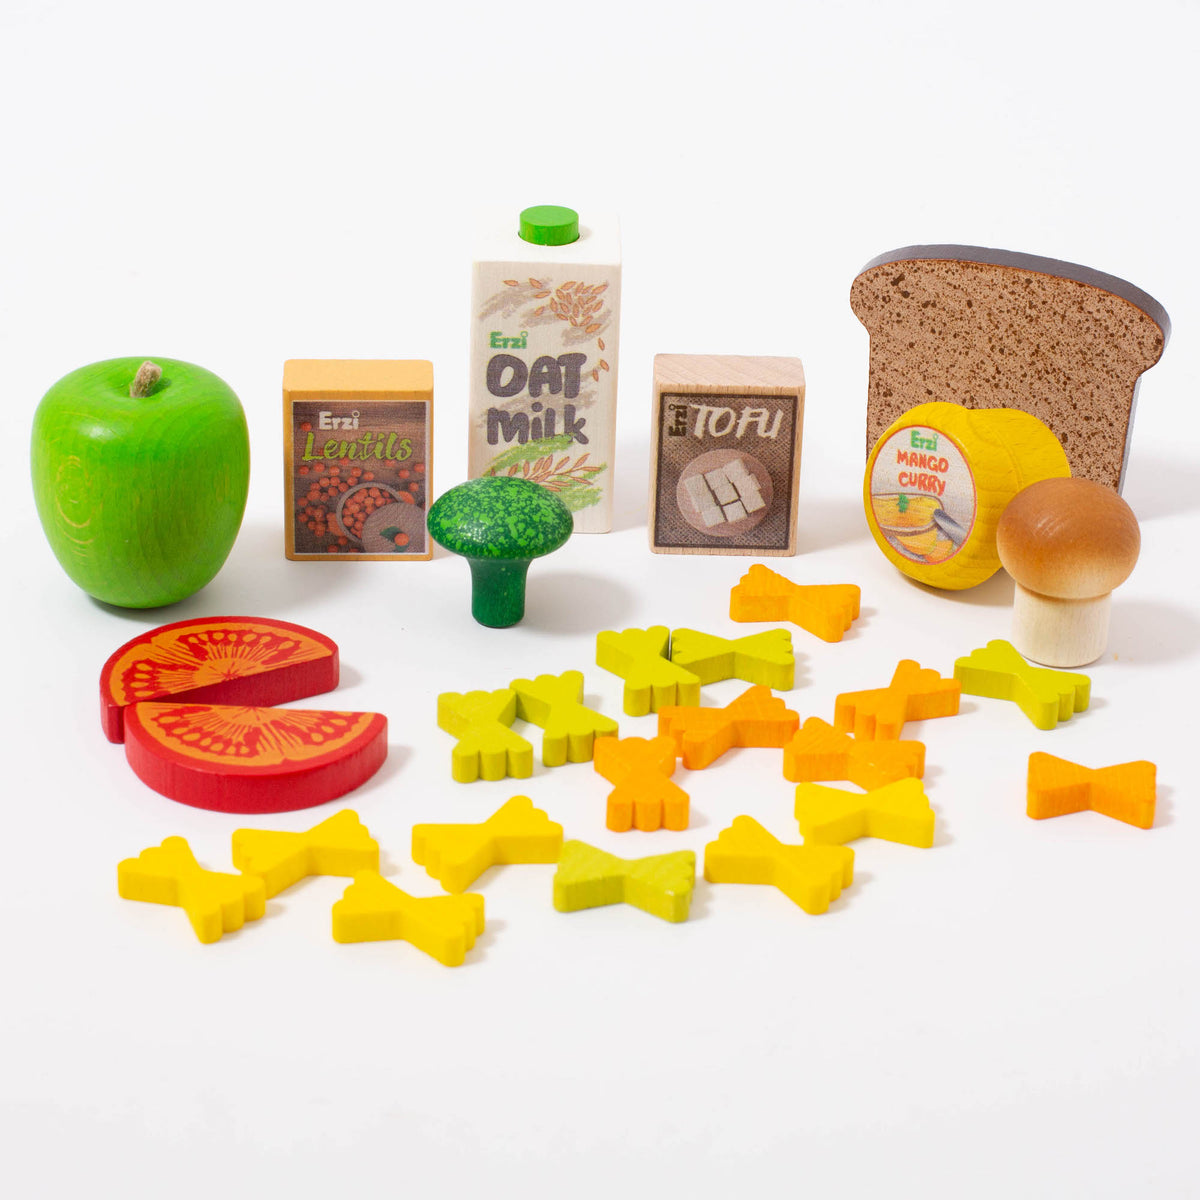 XL Wooden Groceries & Snack Foods in a Crate - Play Foods - Erzi